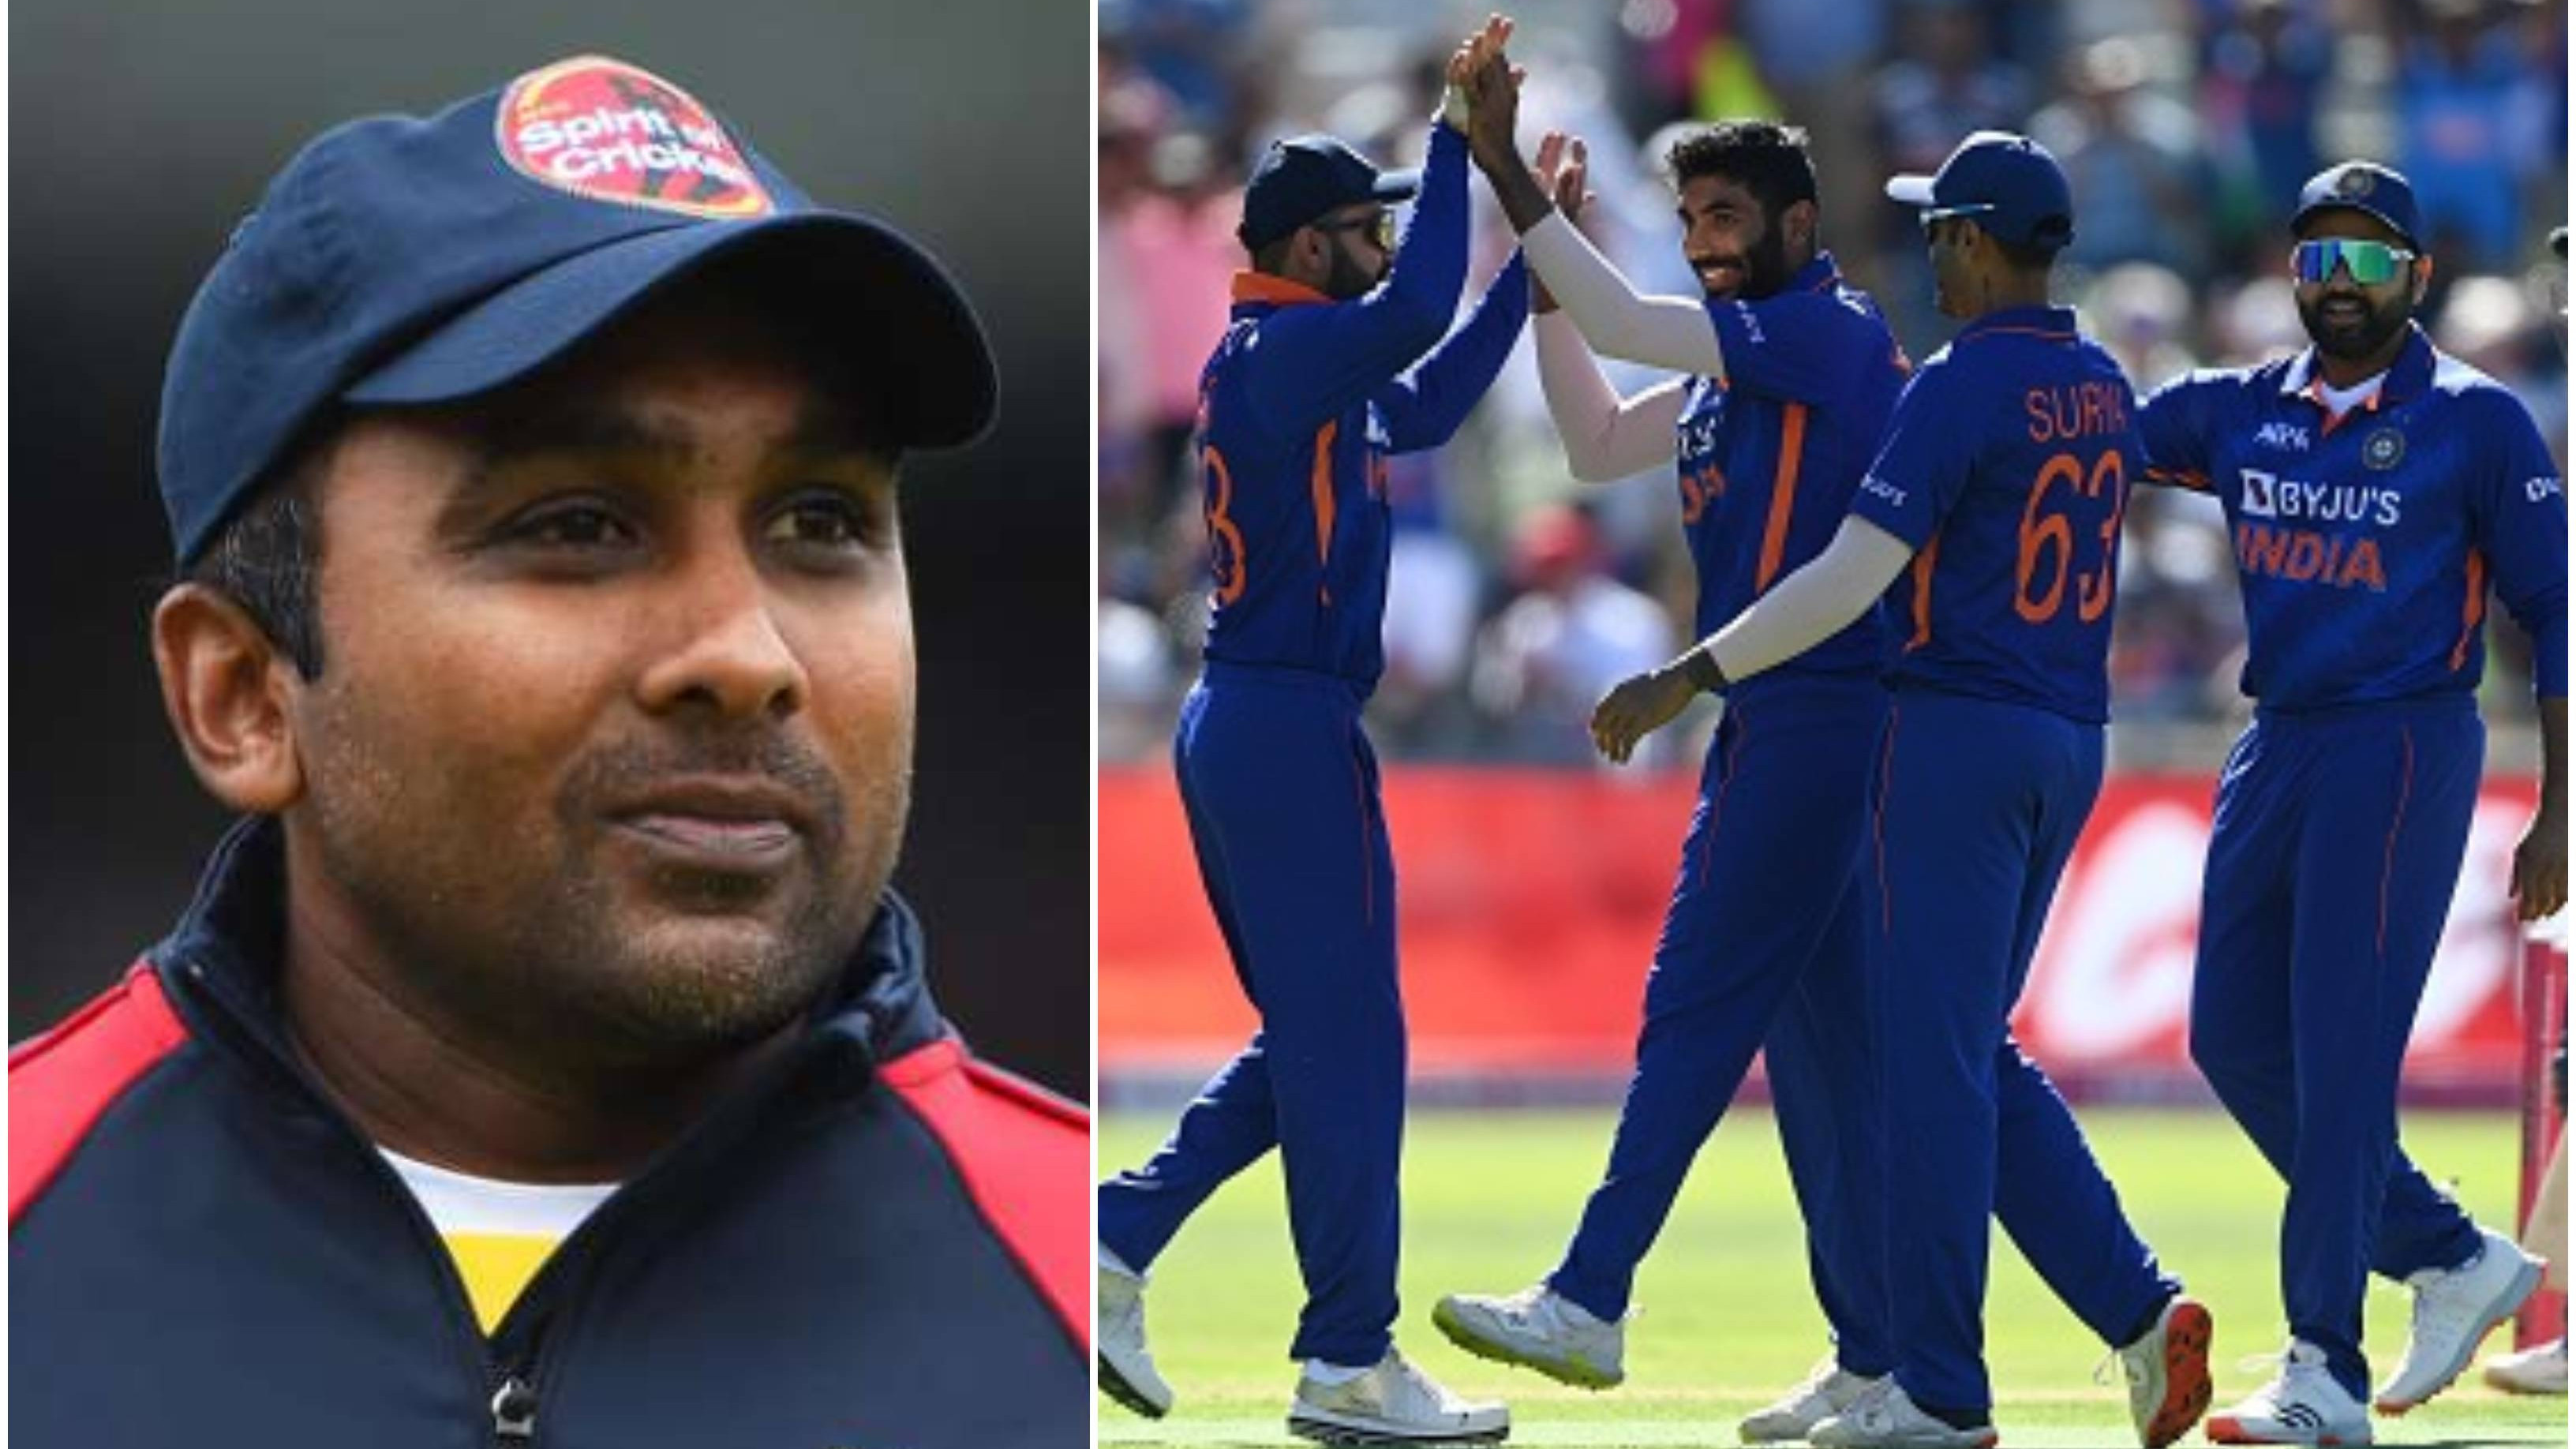 Asia Cup 2022: “That would be a concern”, Mahela Jayawardena weighs in on India’s Asia Cup squad